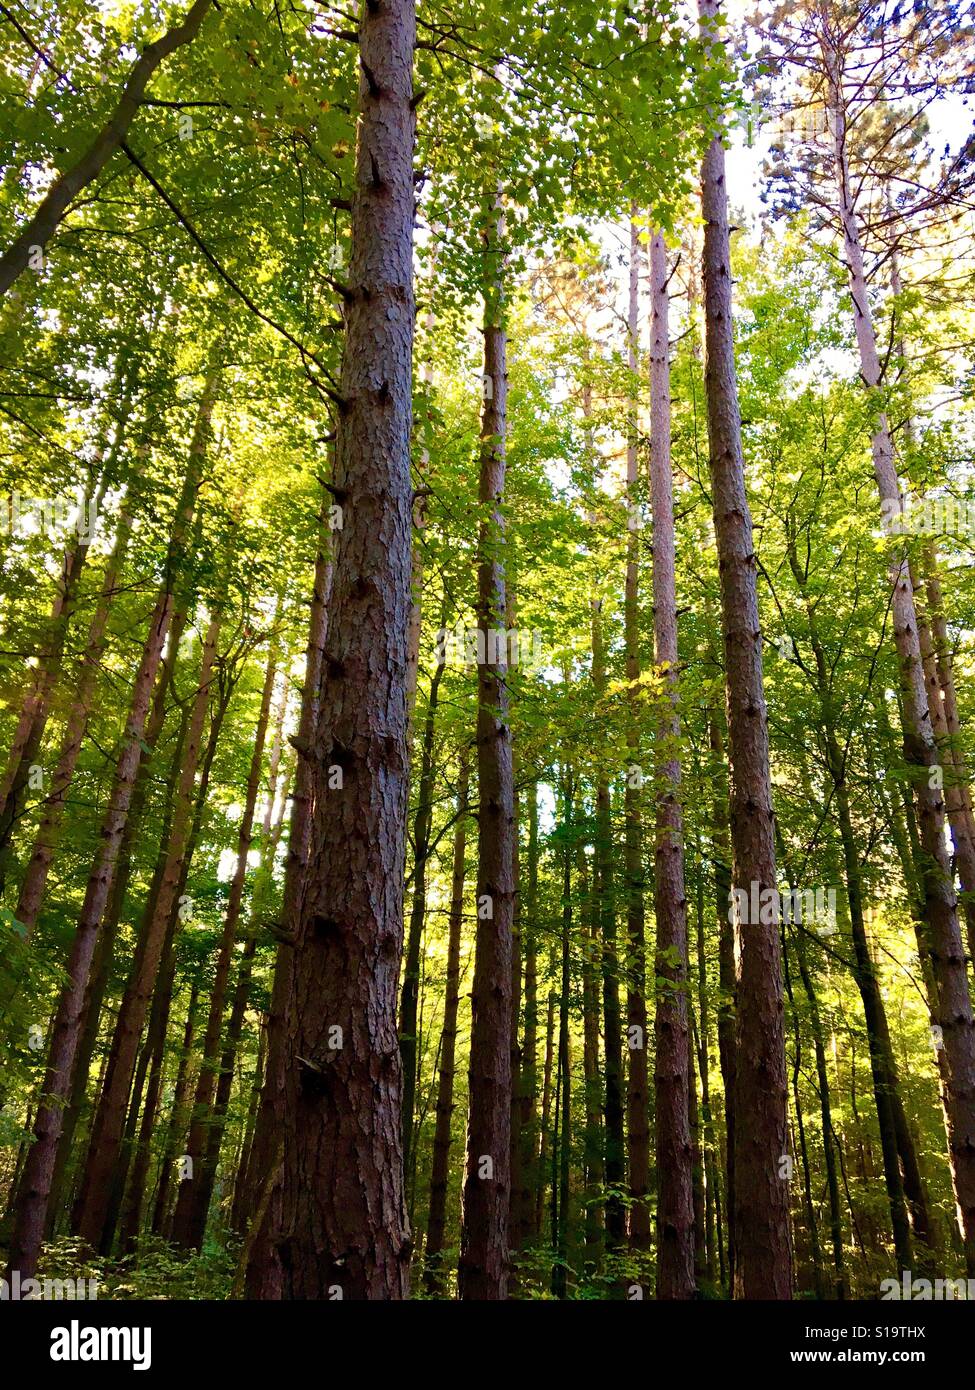 Tall trees at the Pokagon State Park in Indiana. Stock Photo